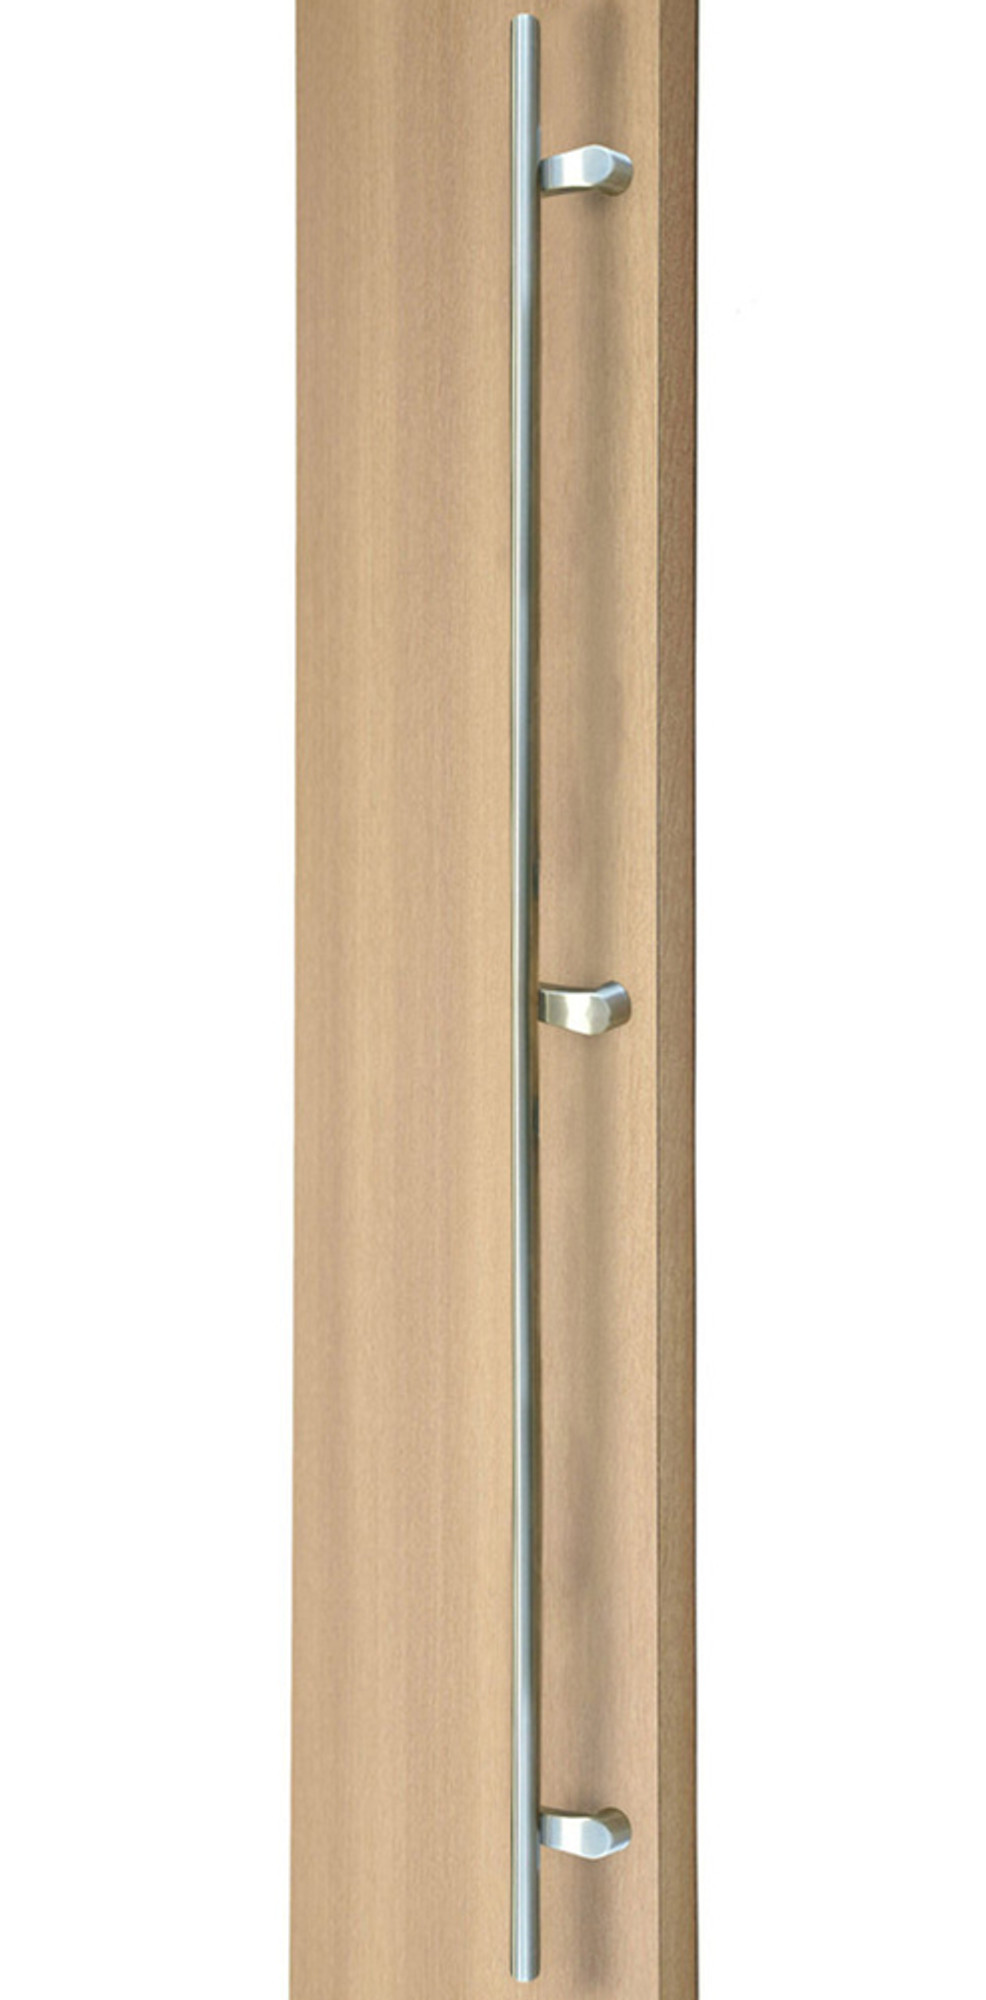 84 inch PostMount Offset Ladder Pull Handle with 3-hole mounting - Back-to-Back (Brushed Satin Stainless Steel Finish) mockup on door